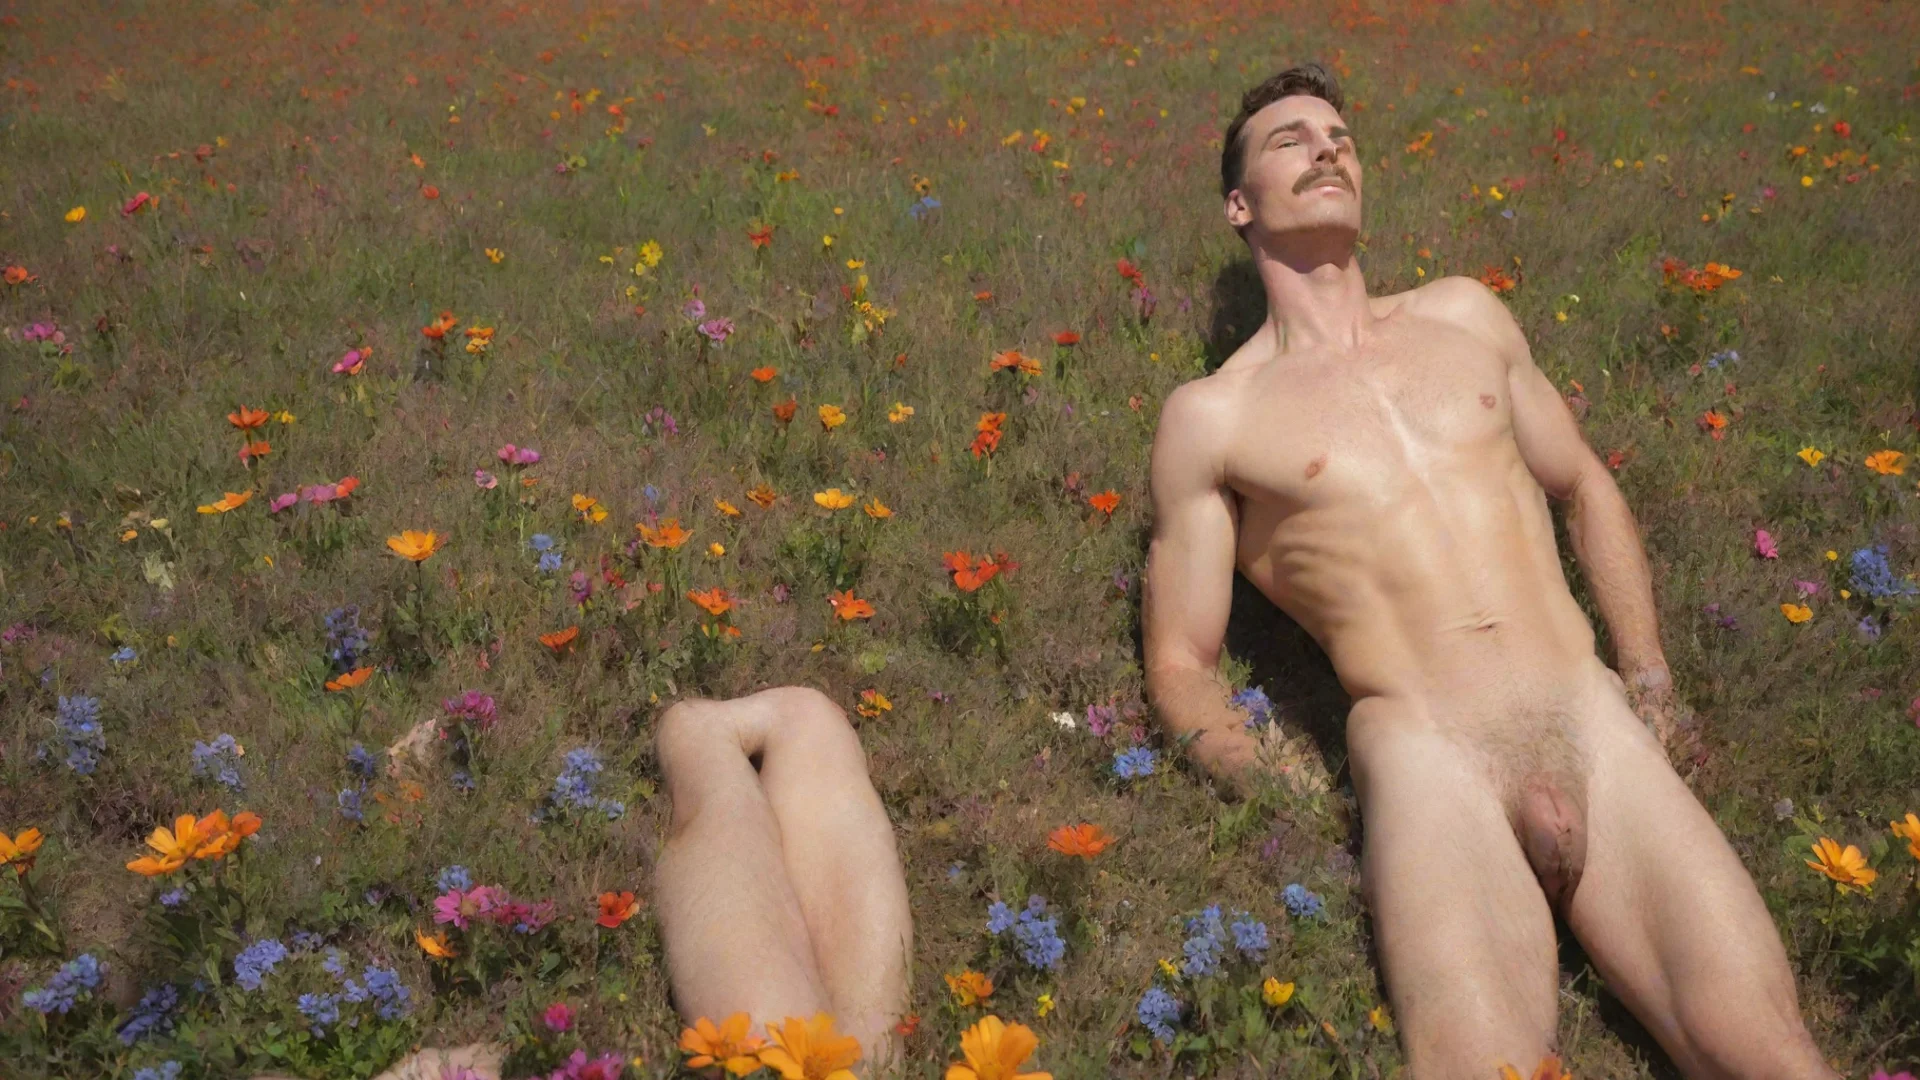 amazing shirtless man lying floor in colorful meadow tom of finland style awesome portrait 2 wide